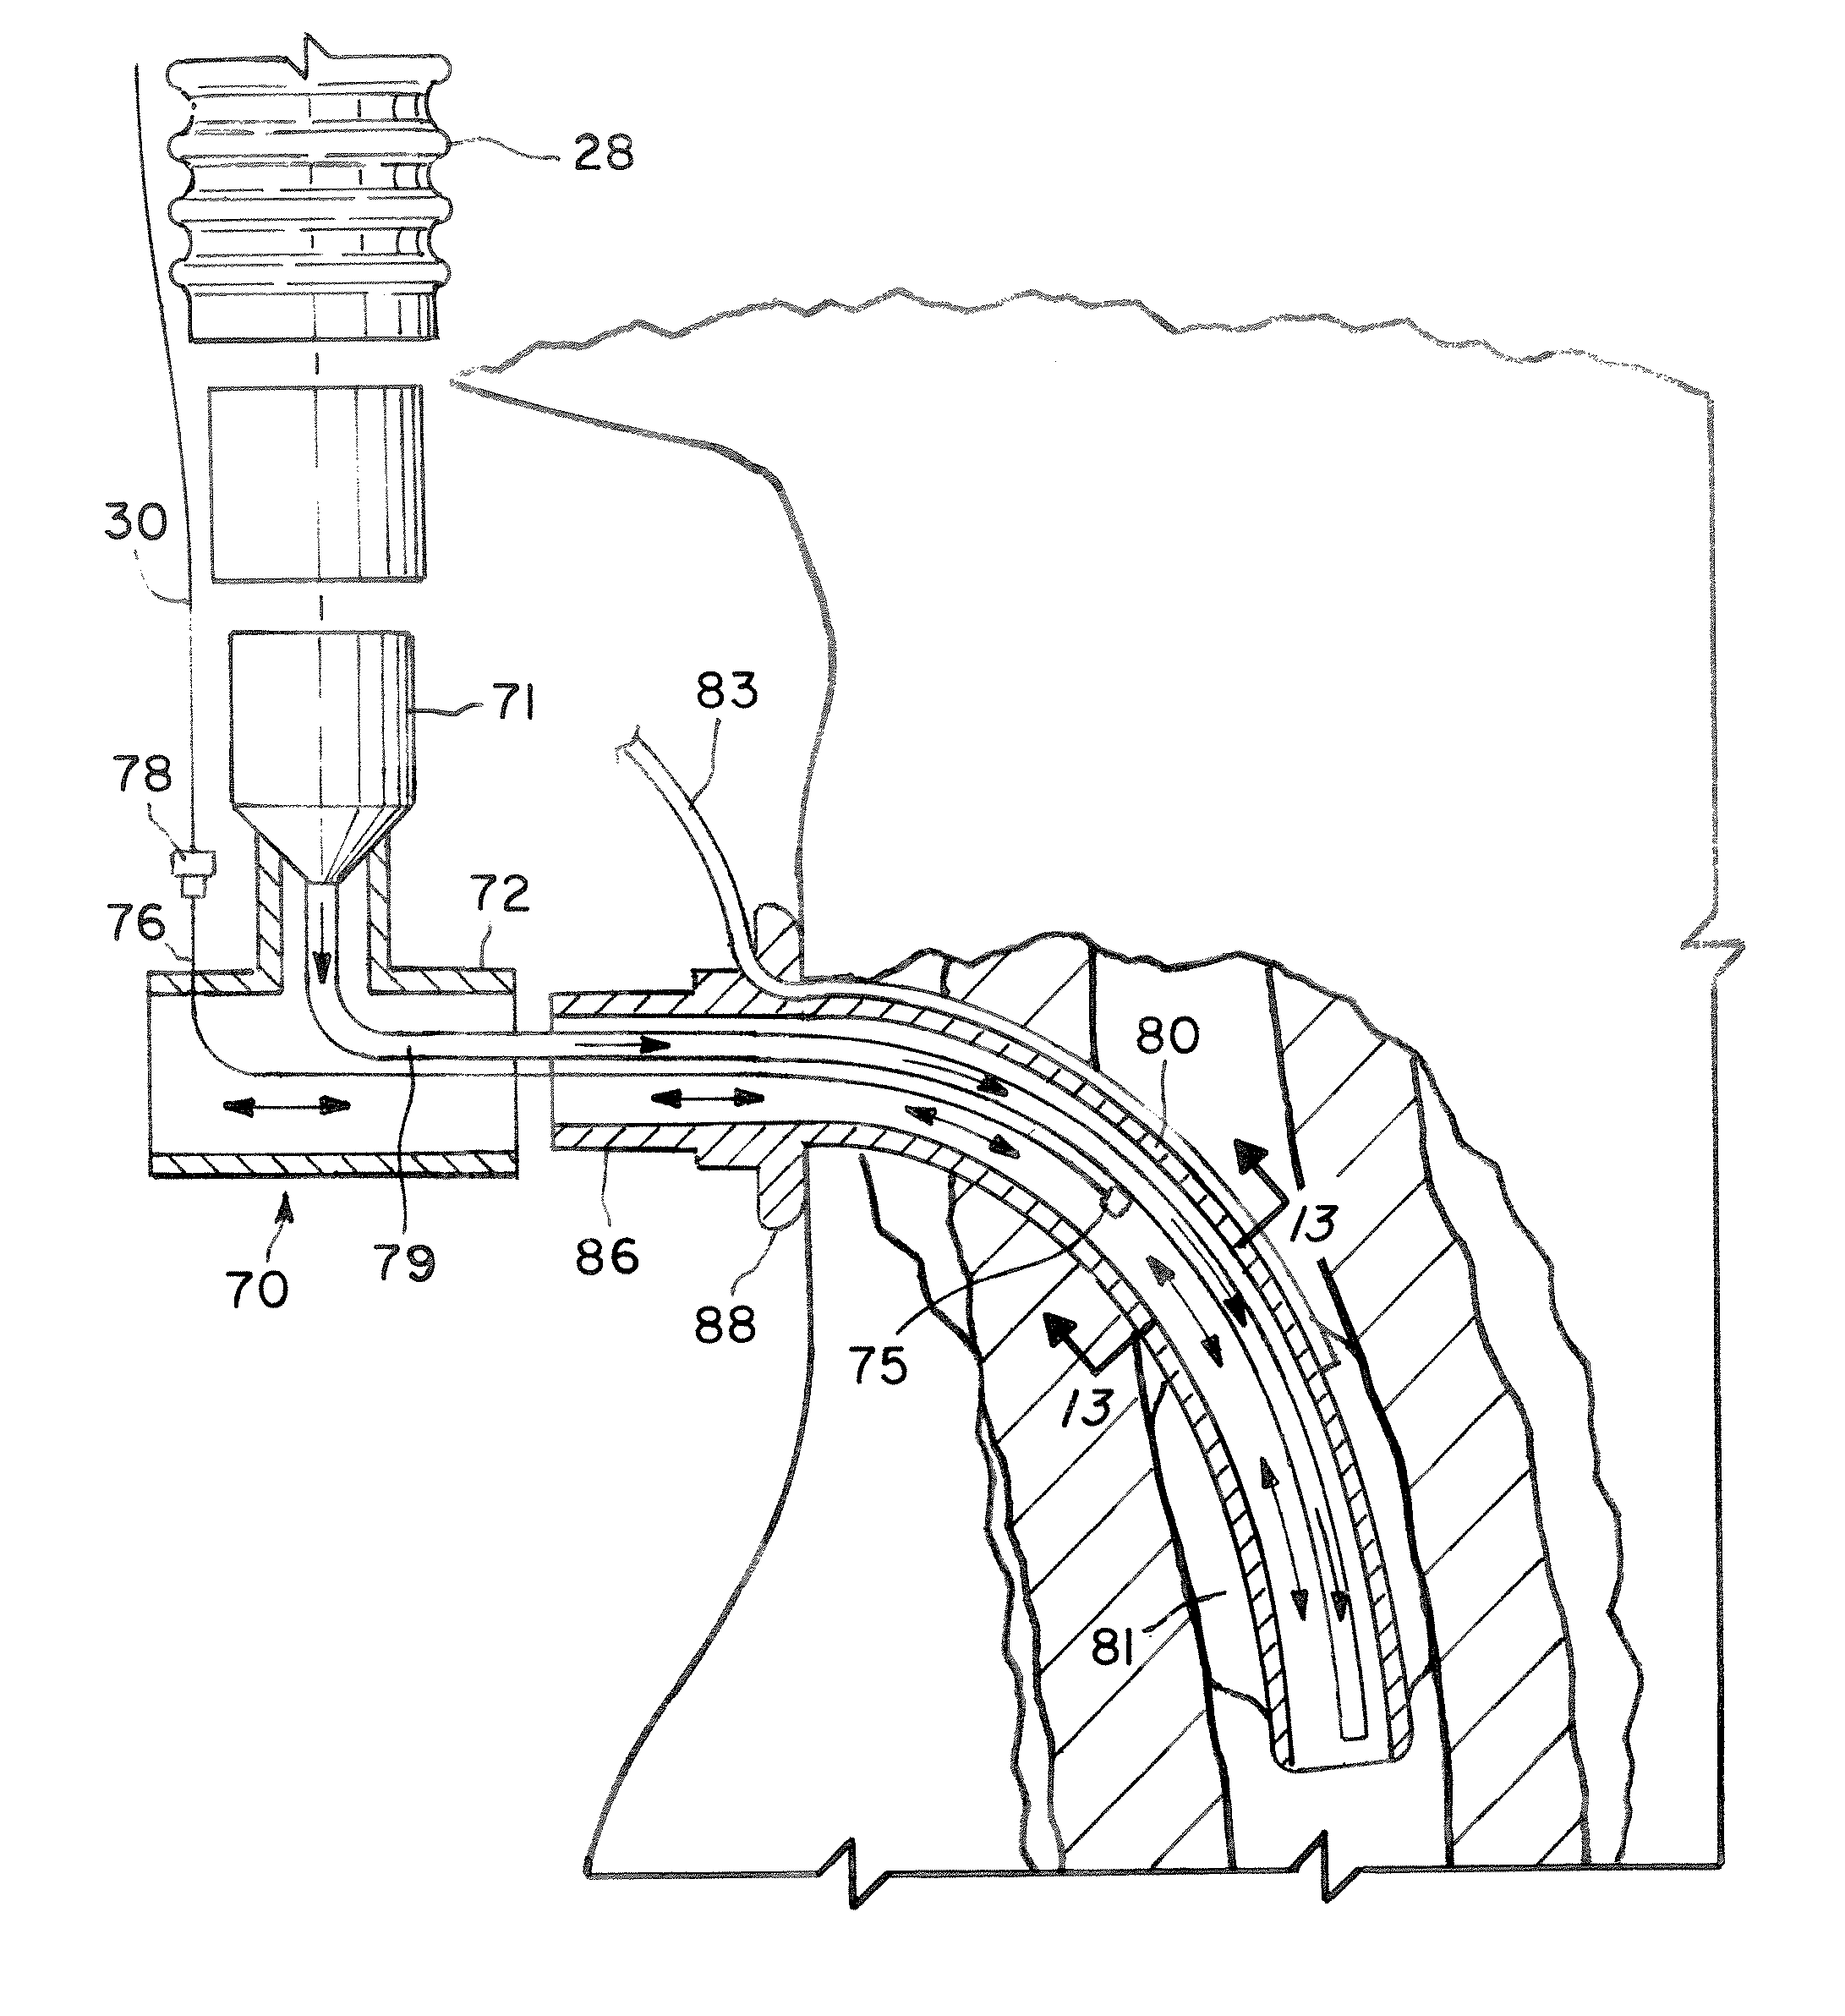 System for providing flow-targeted ventilation synchronized to a patients breathing cycle